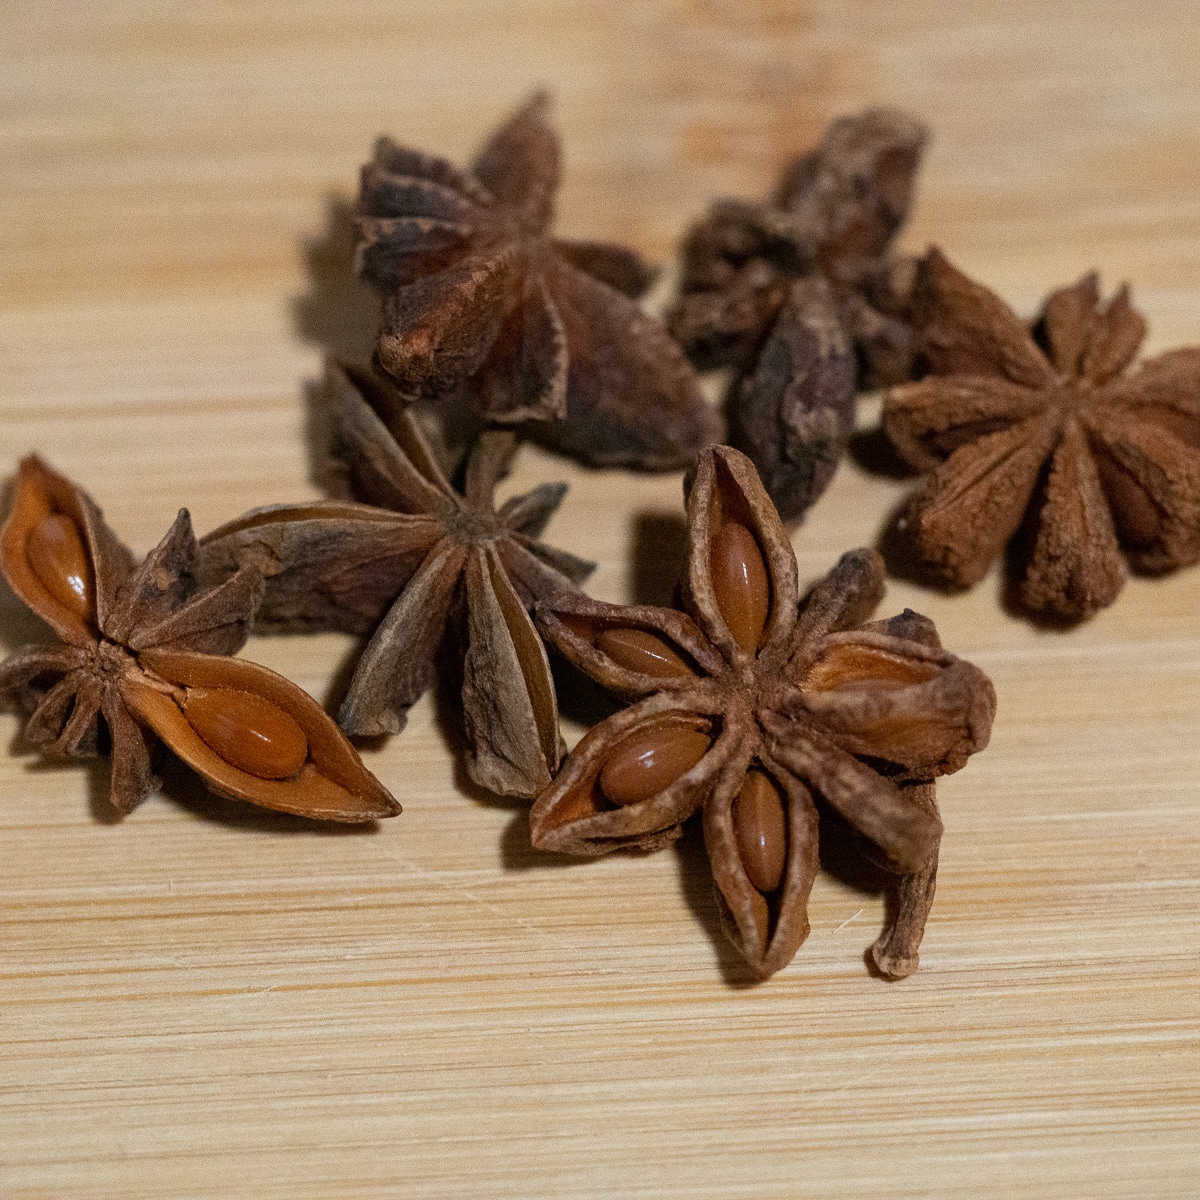 Star anise on a wooden surface